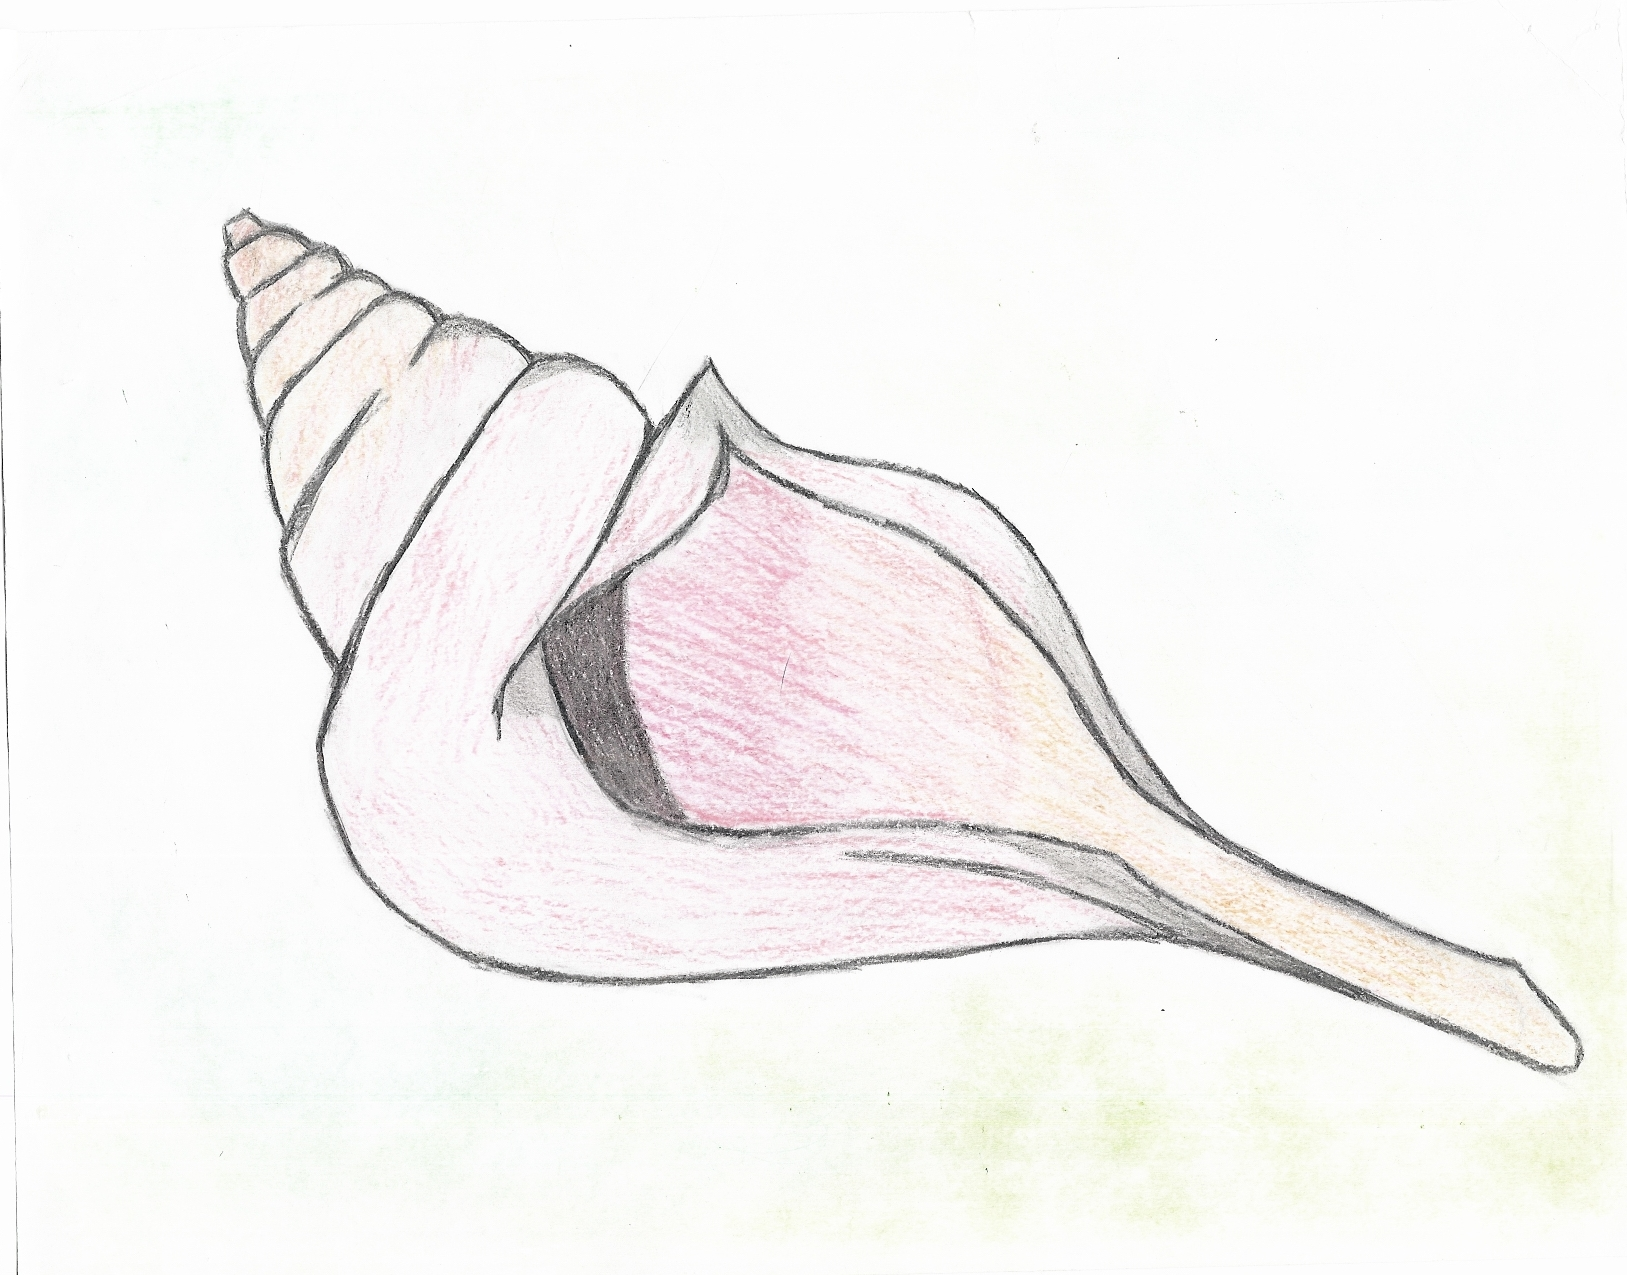 Conch Shell by Ryoshi-No-Hikari on Clipart library